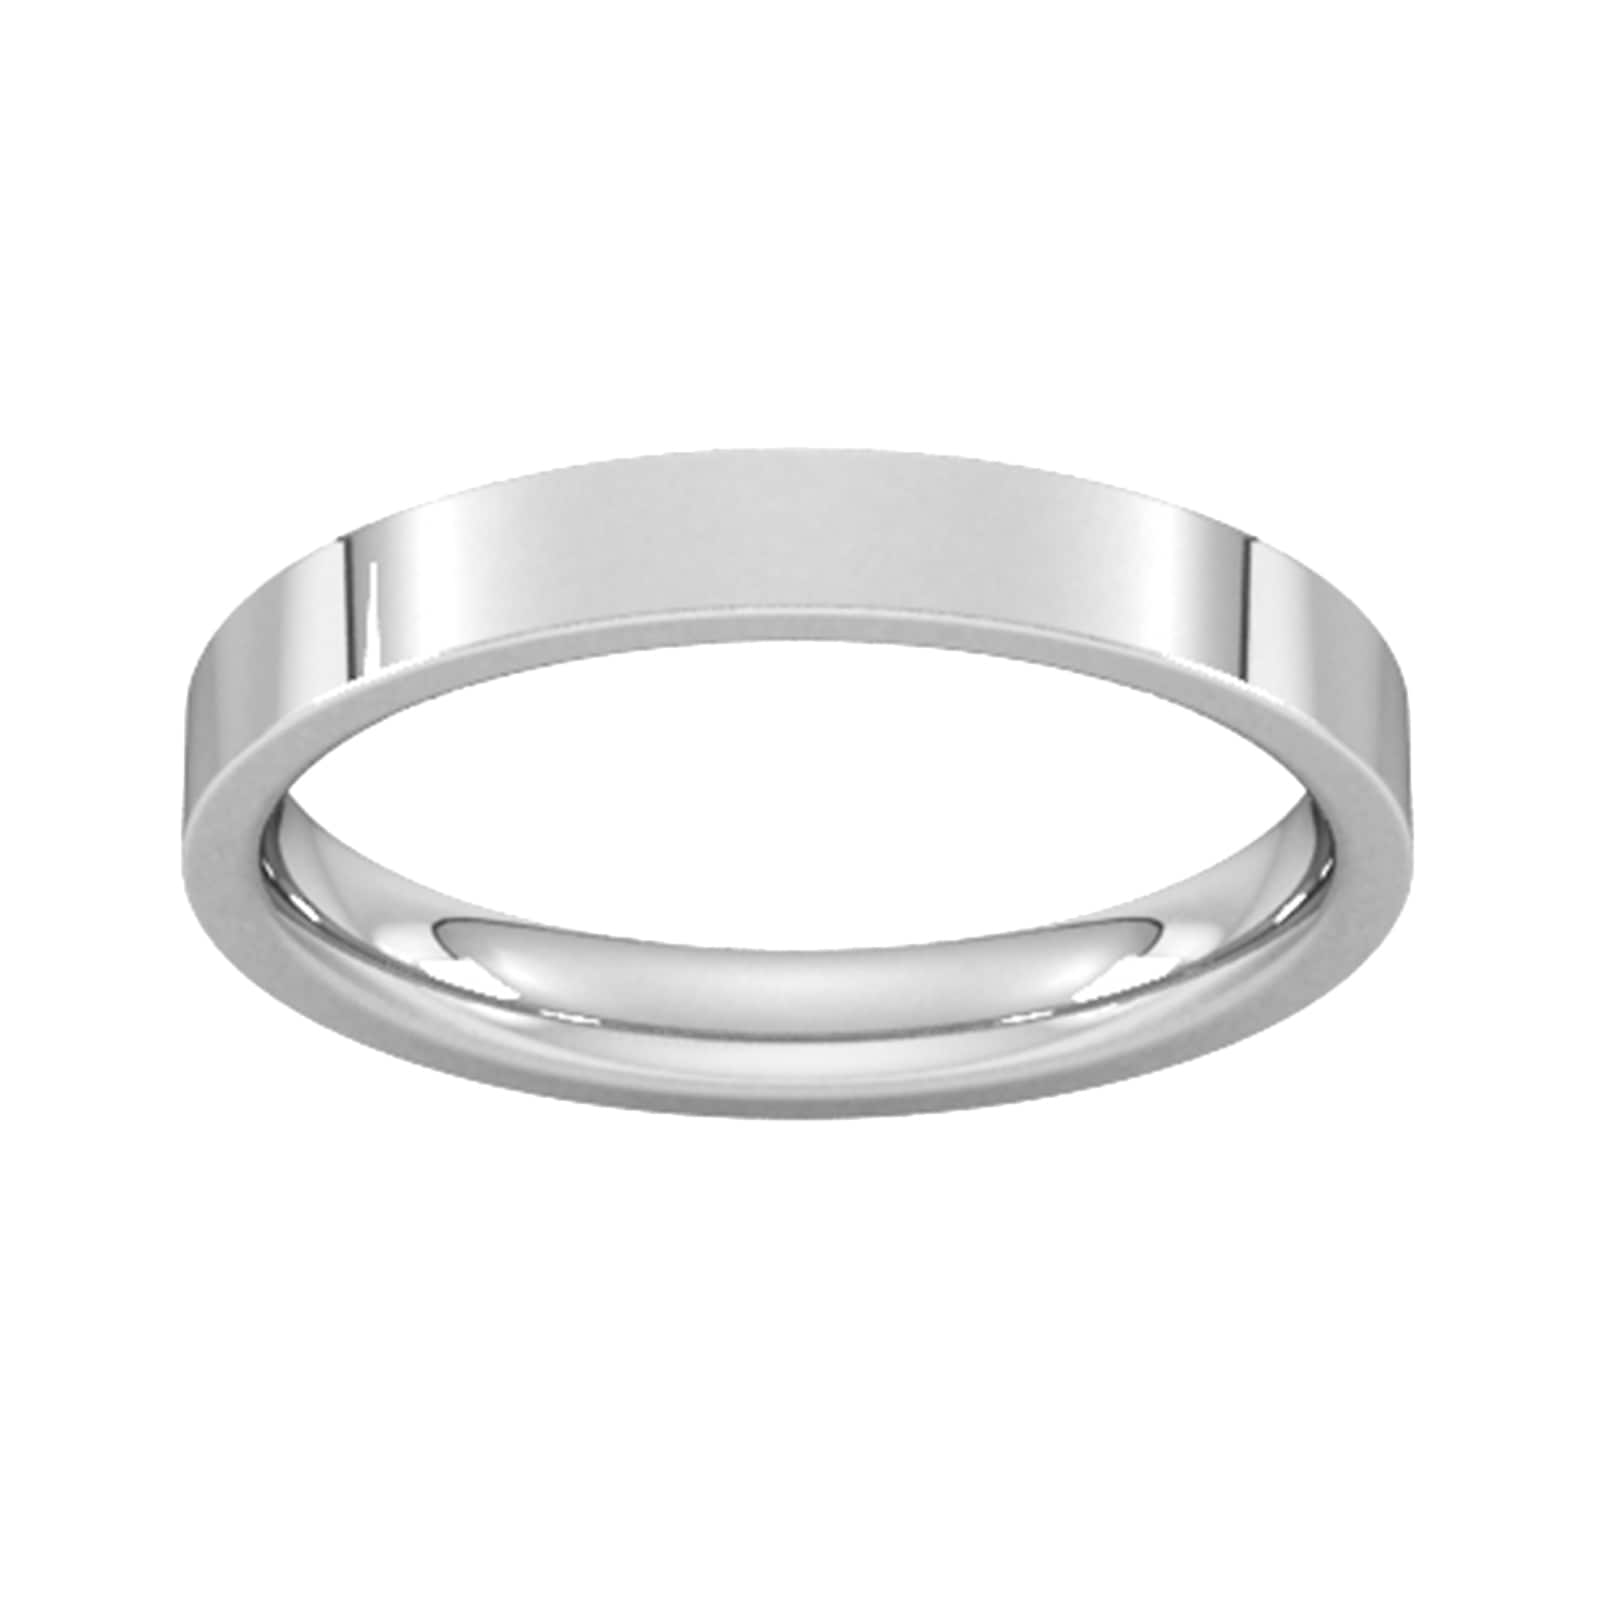 3mm Flat Court Heavy Wedding Ring In 9 Carat White Gold - Ring Size M